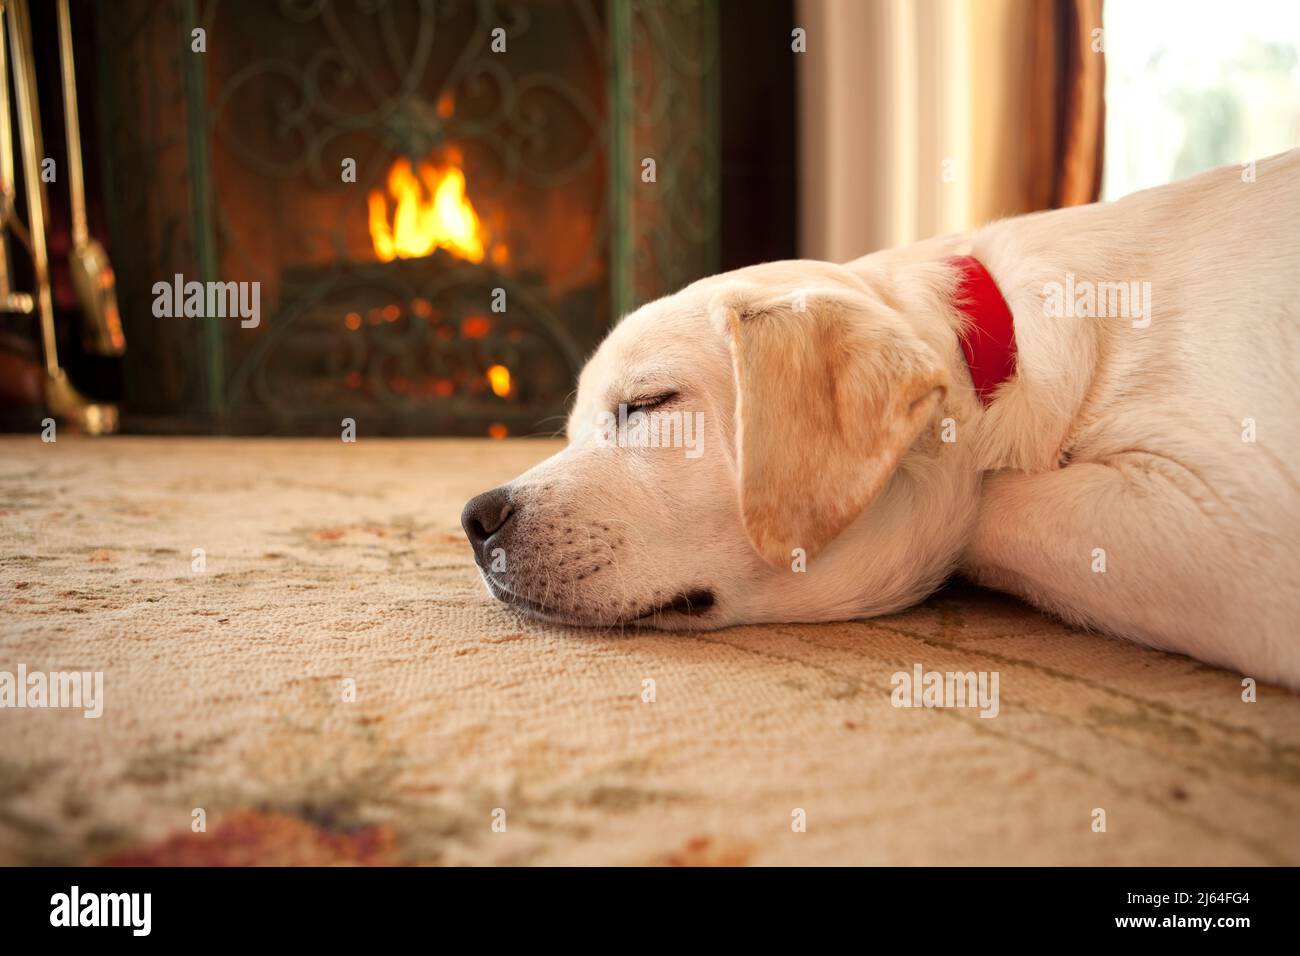 A yellow Labrador Retriever puppy sleeping in front of a roaring fire. Stock Photo